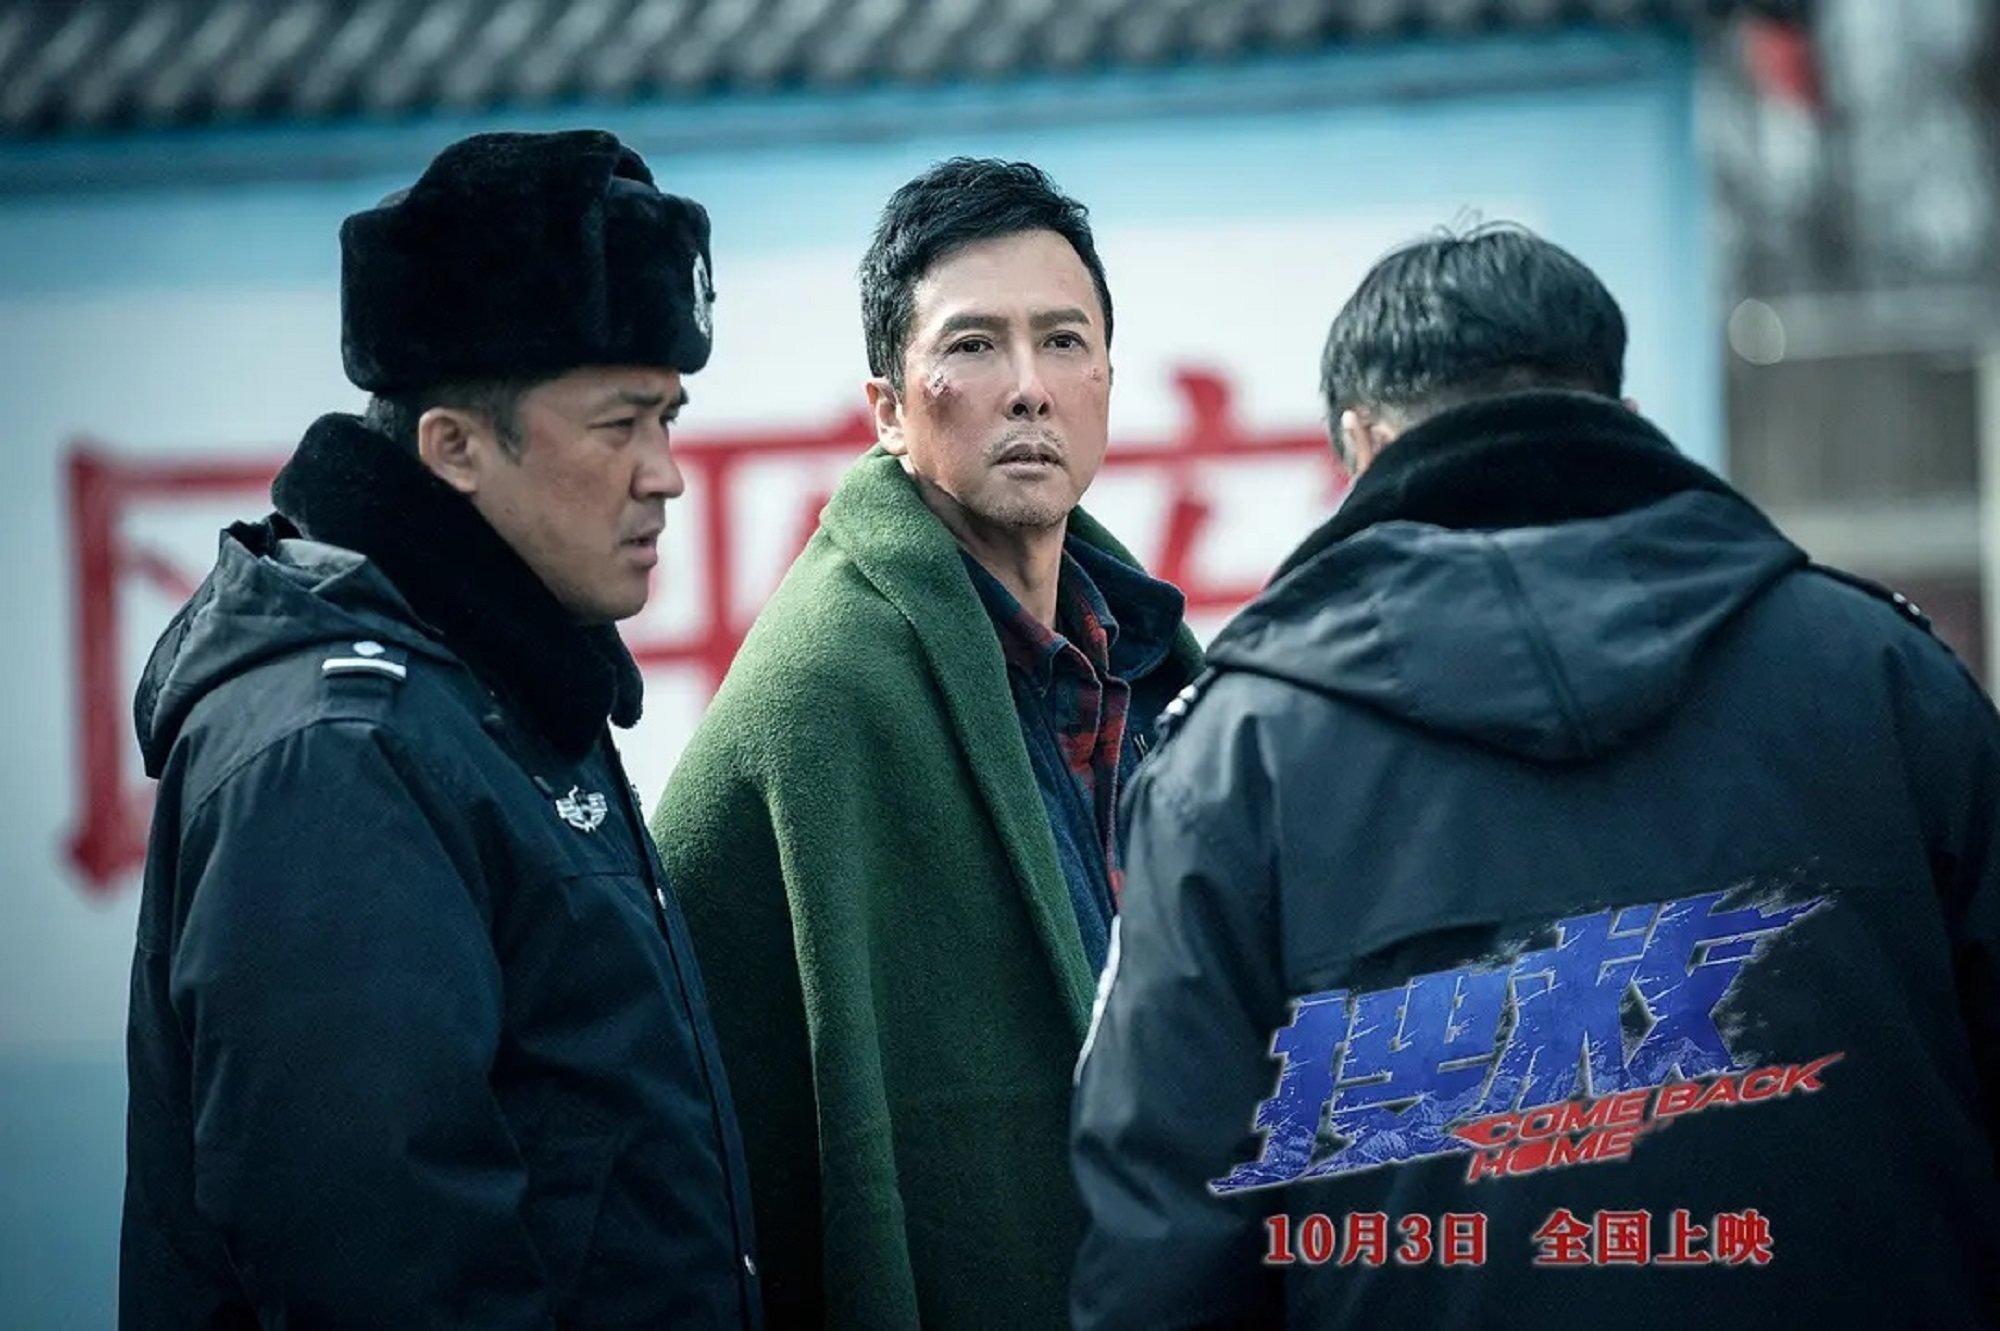 Donnie Yen in a still from Come Back Home, a thriller about a mountain rescue that opened in cinemas in China on October 3 to cash in on the National Day holiday.